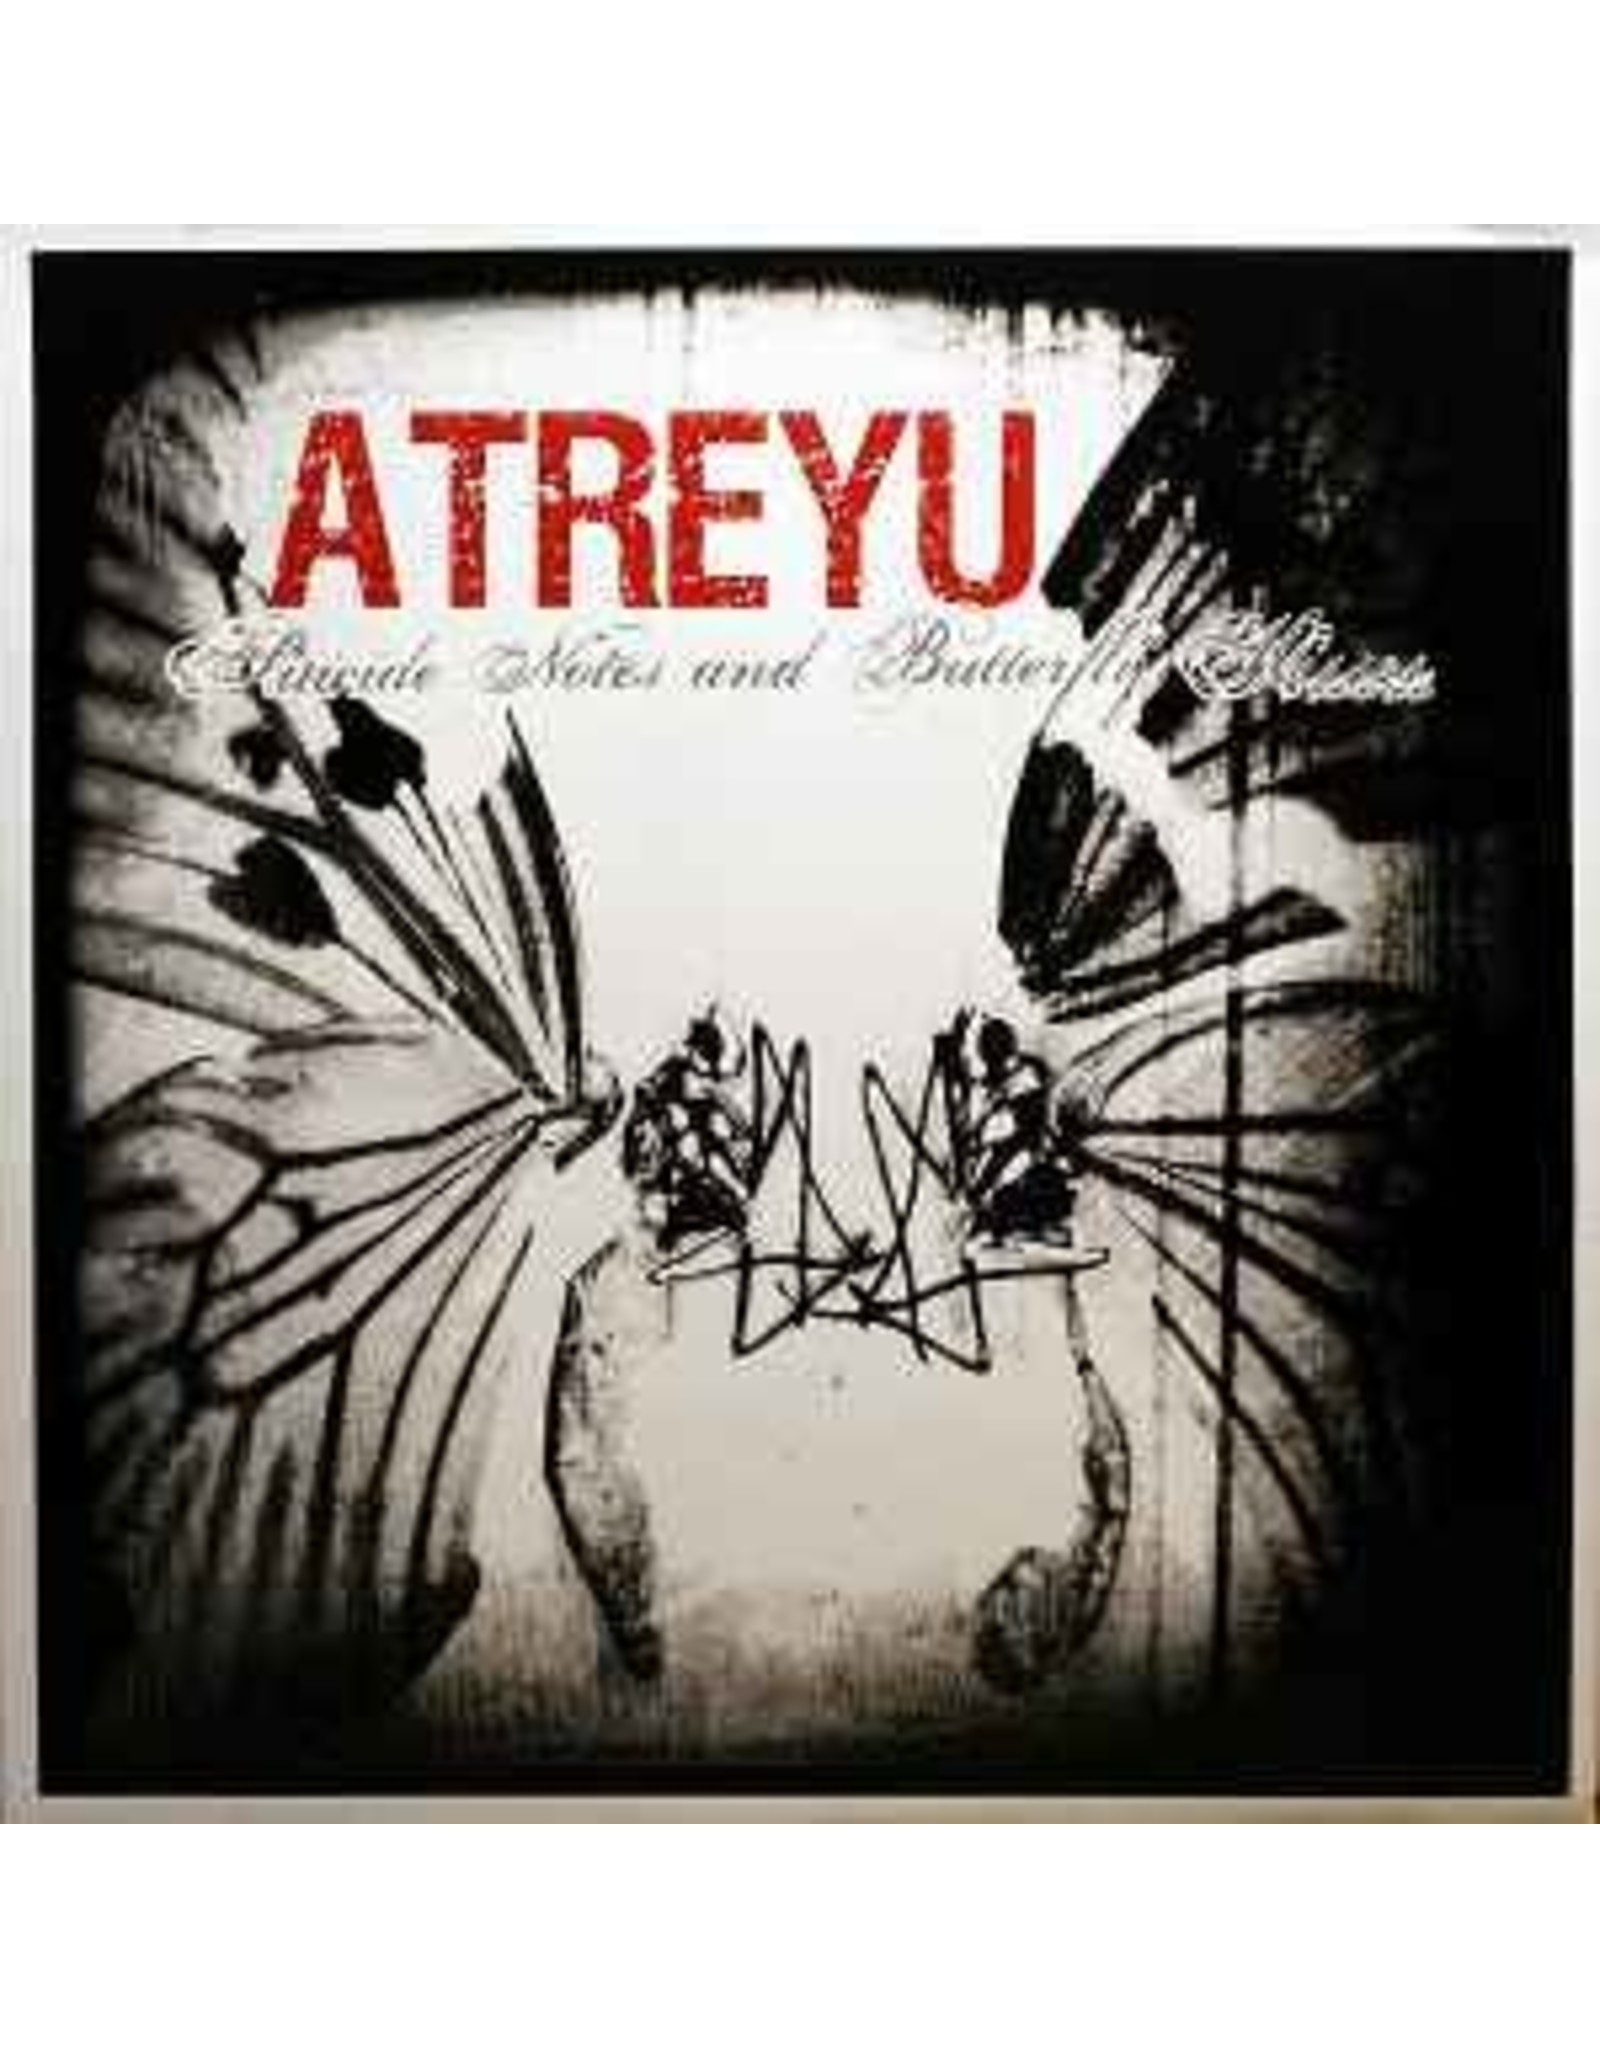 Atreyu - Suicide Notes And Butterfly Kisses LP